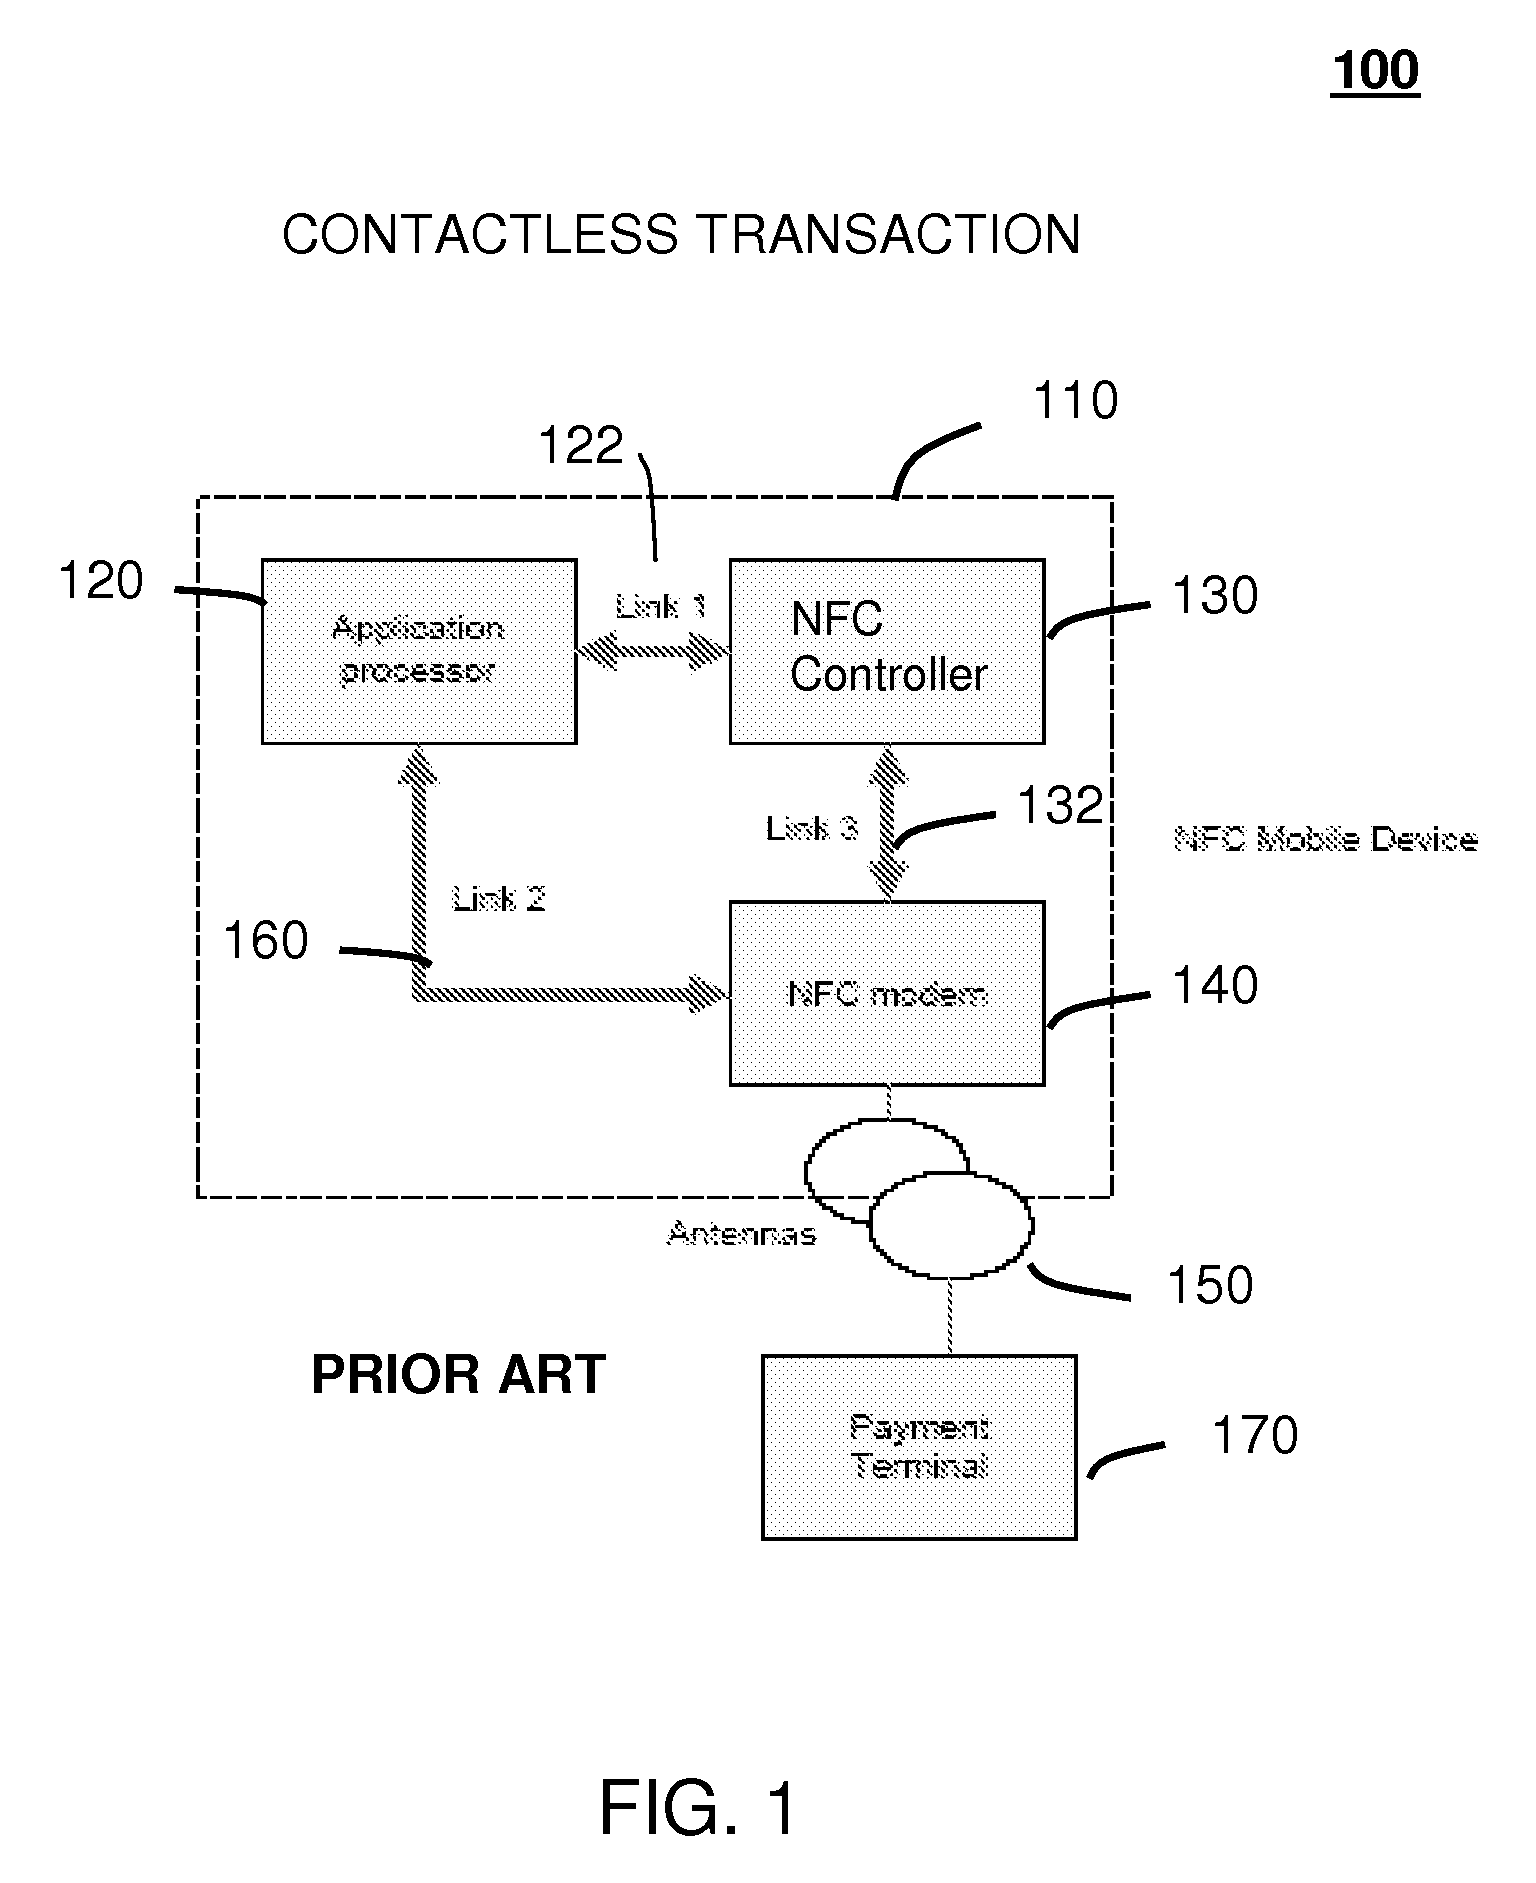 Method and system for monitoring secure applet events during contactless rfid/nfc communication